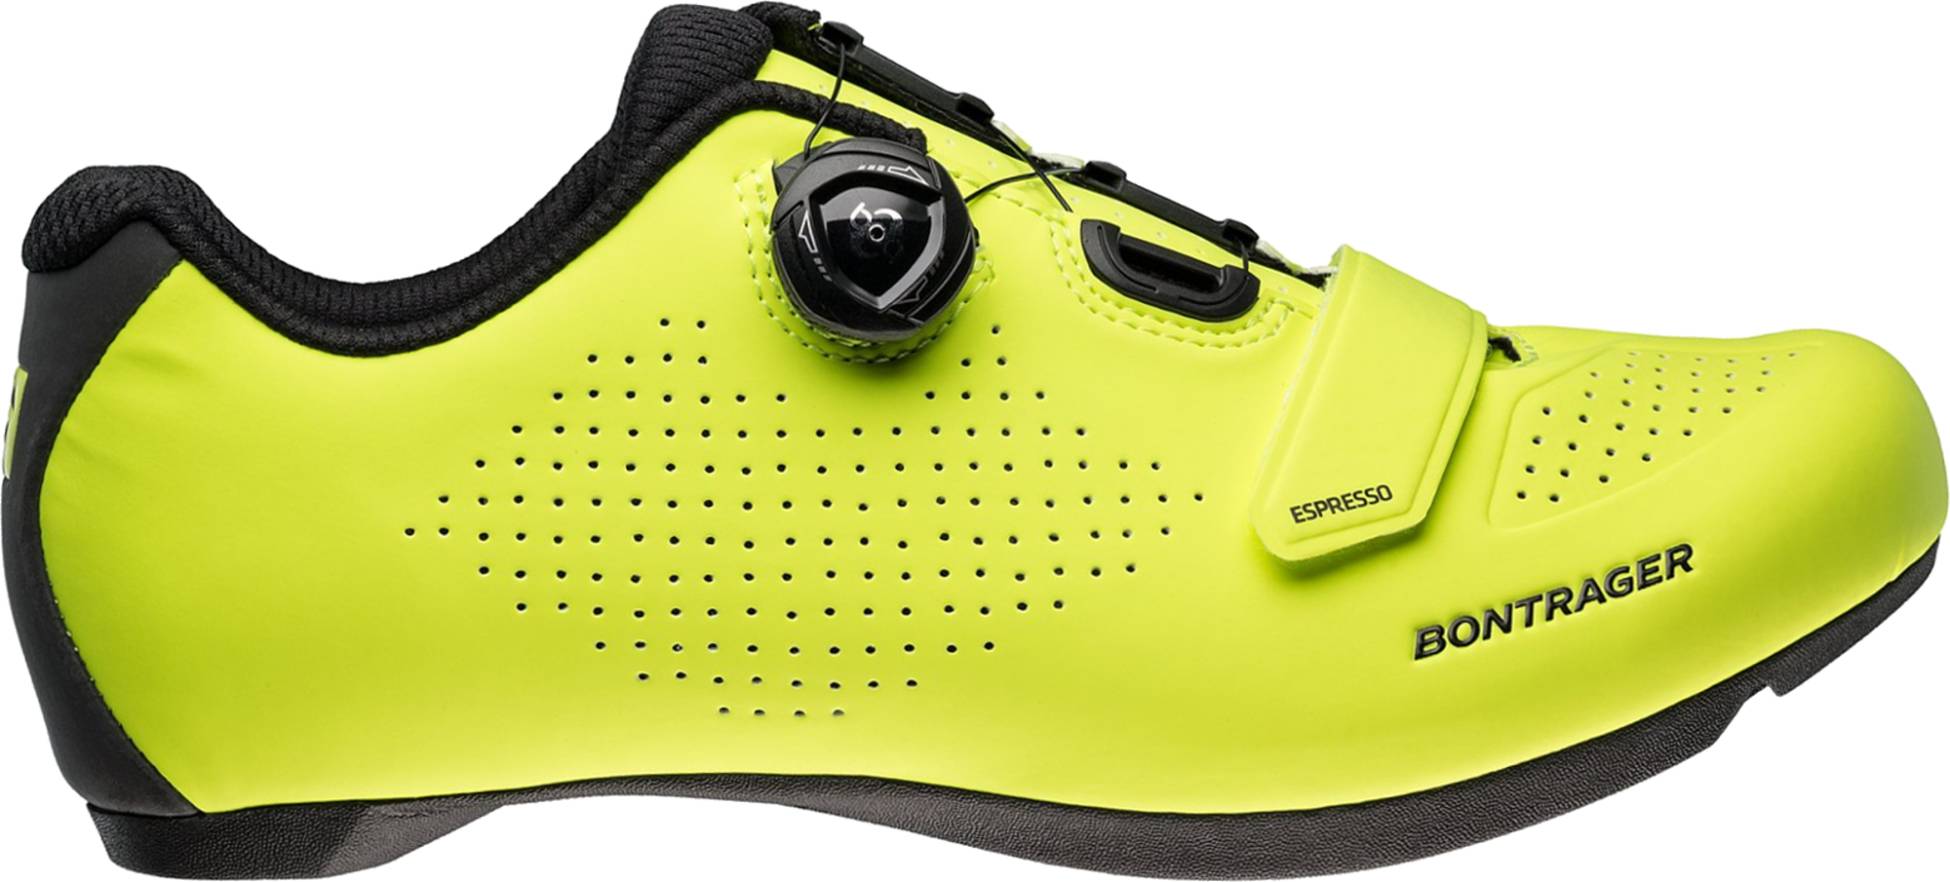 road bike shoes with recessed cleats